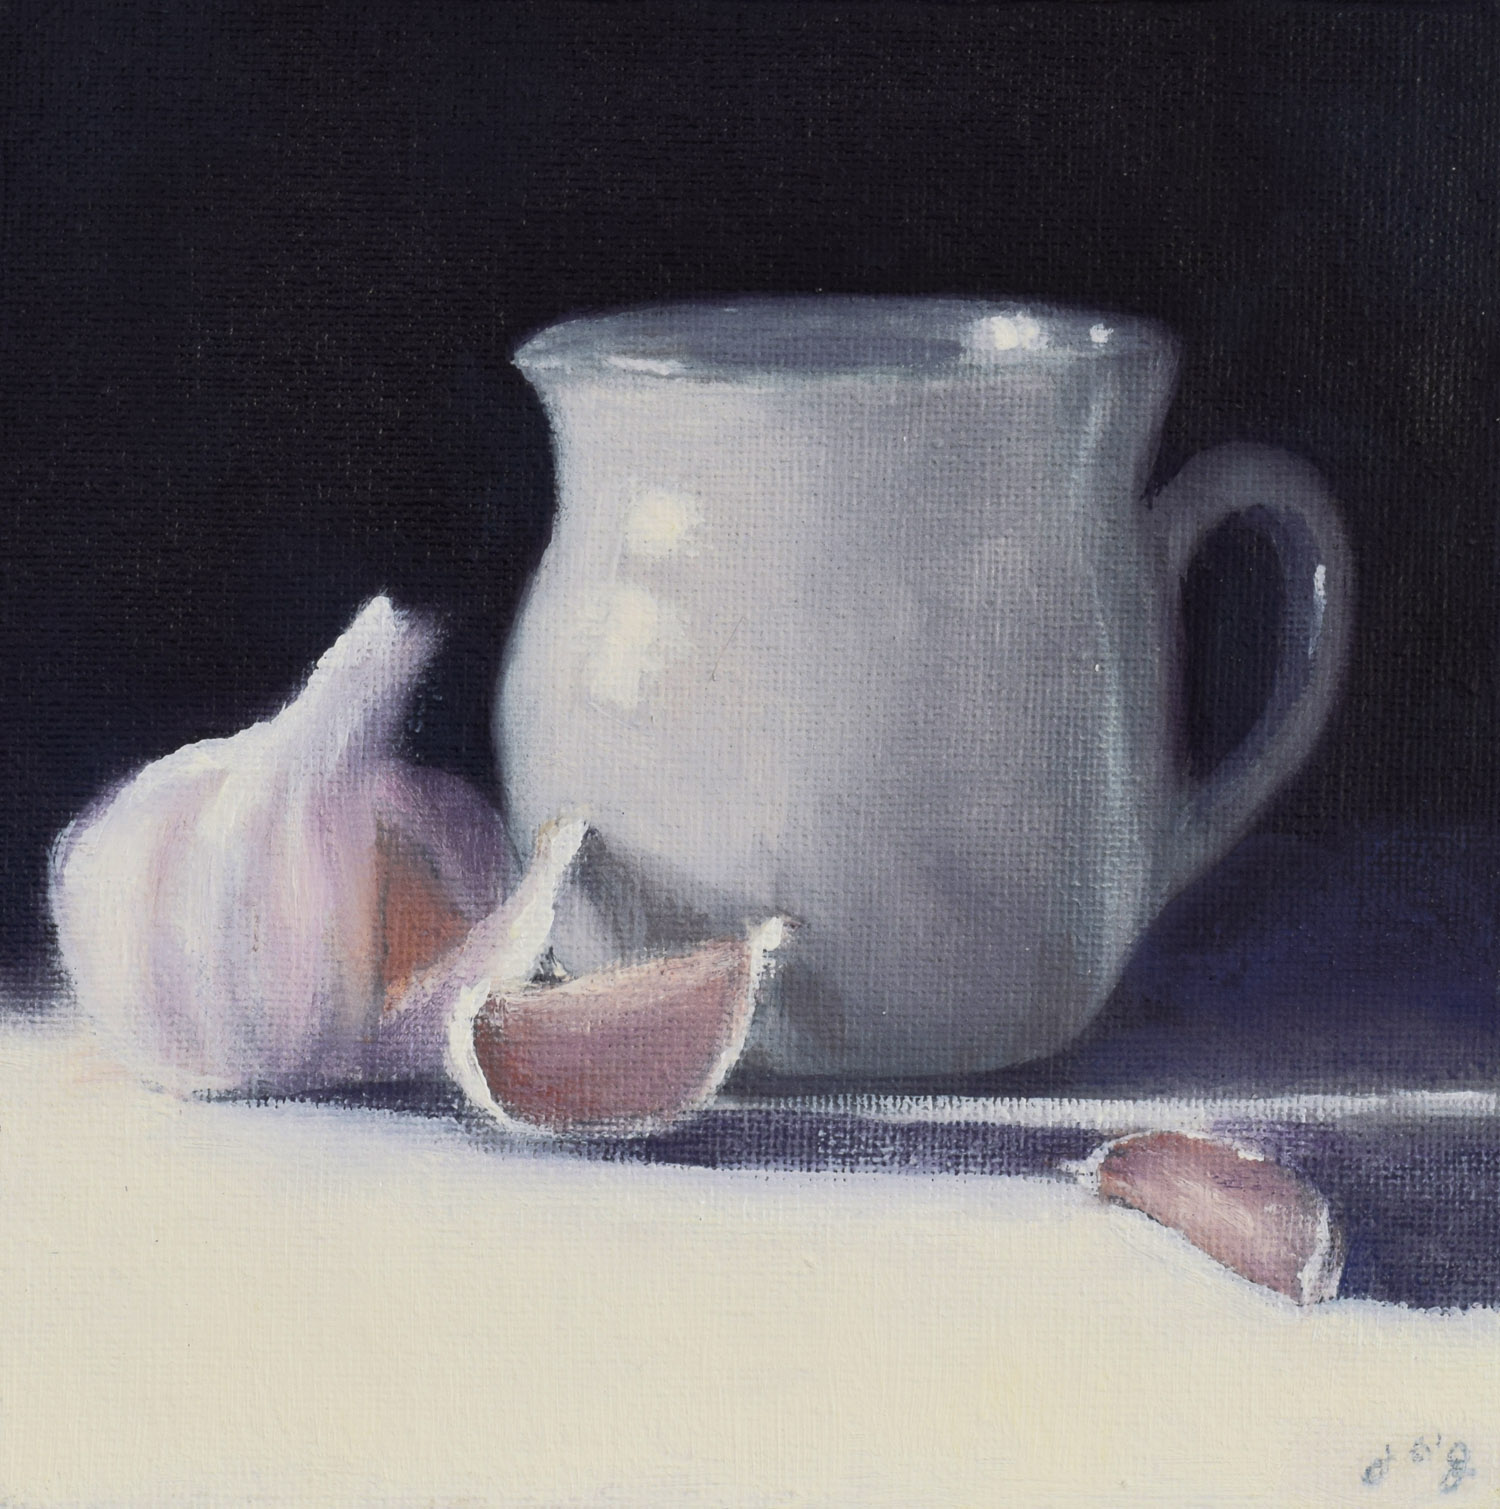 Morning Light with Ceramic and Garlic by John O'Grady | A small still life that shows off the texture of the garlic against the milk pot